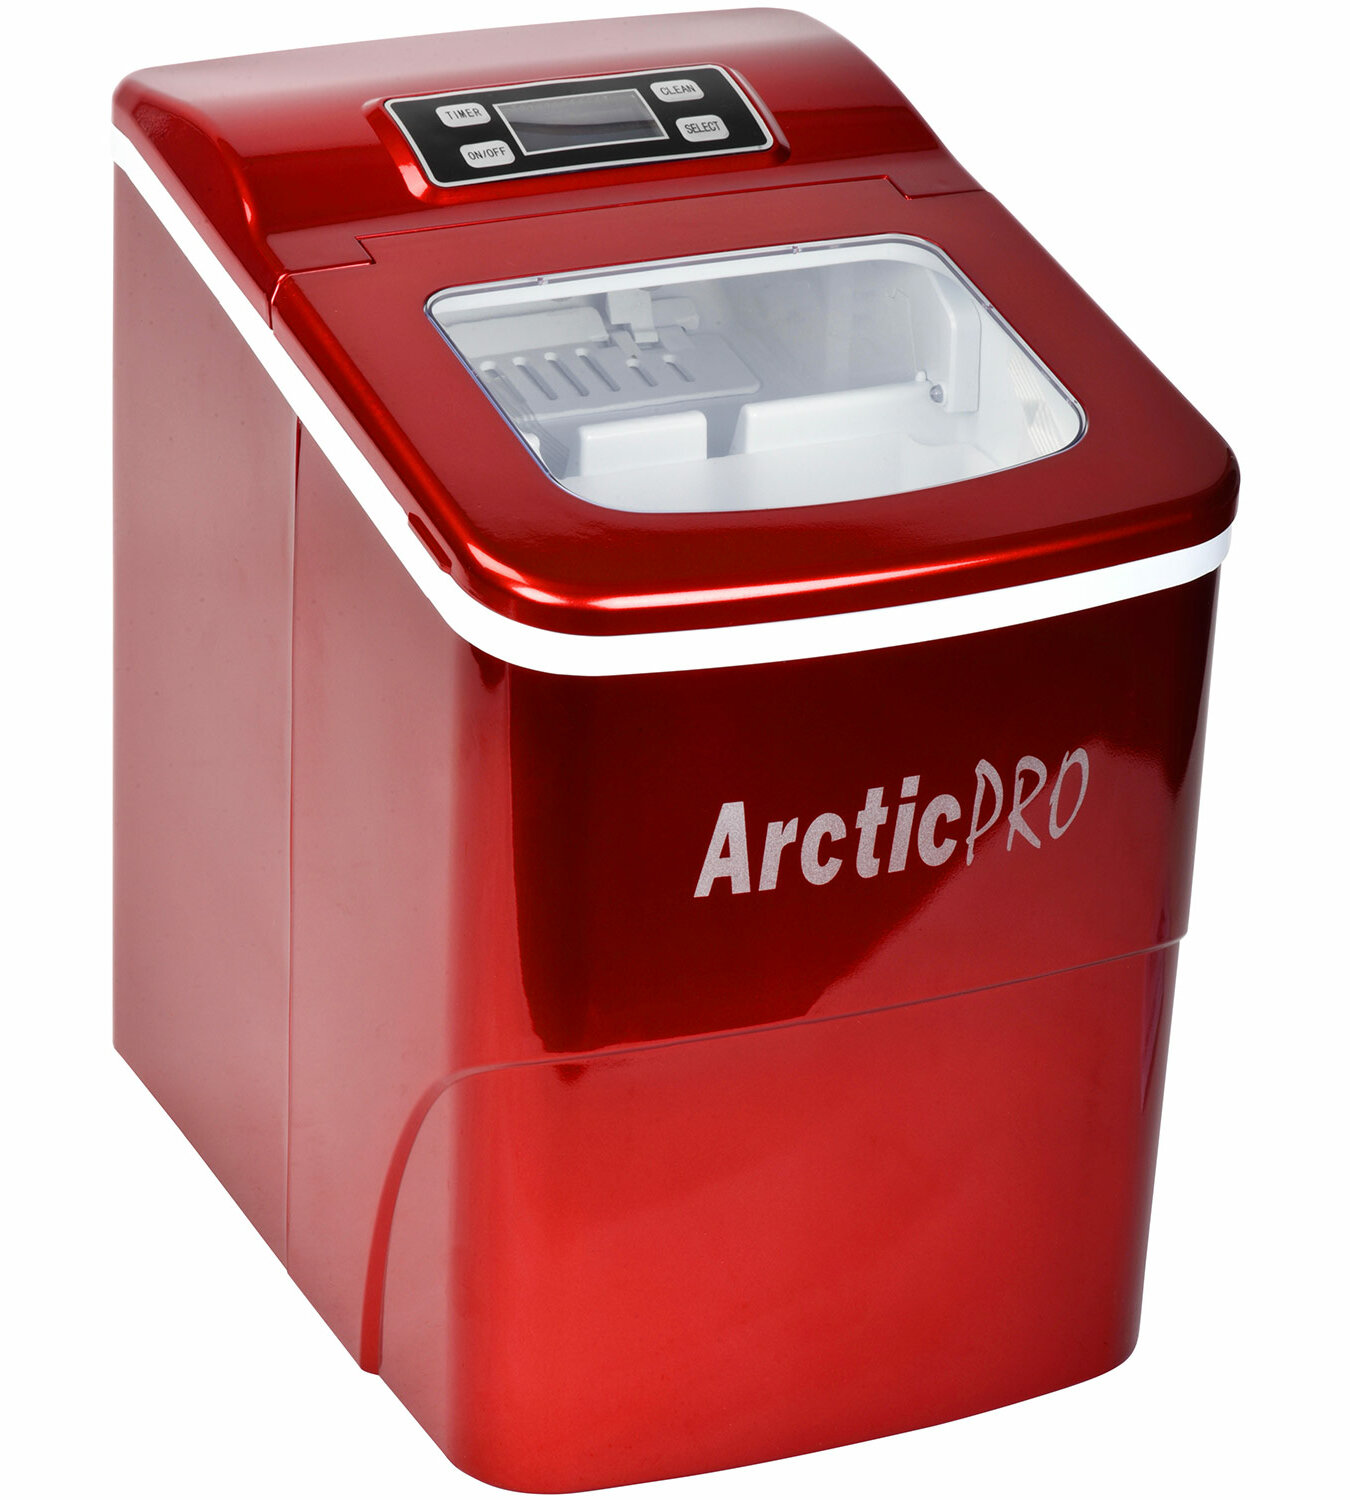 White-Stainless Steel Arctic-Pro Easy Clean Flip-Top Lid Portable Ice Maker